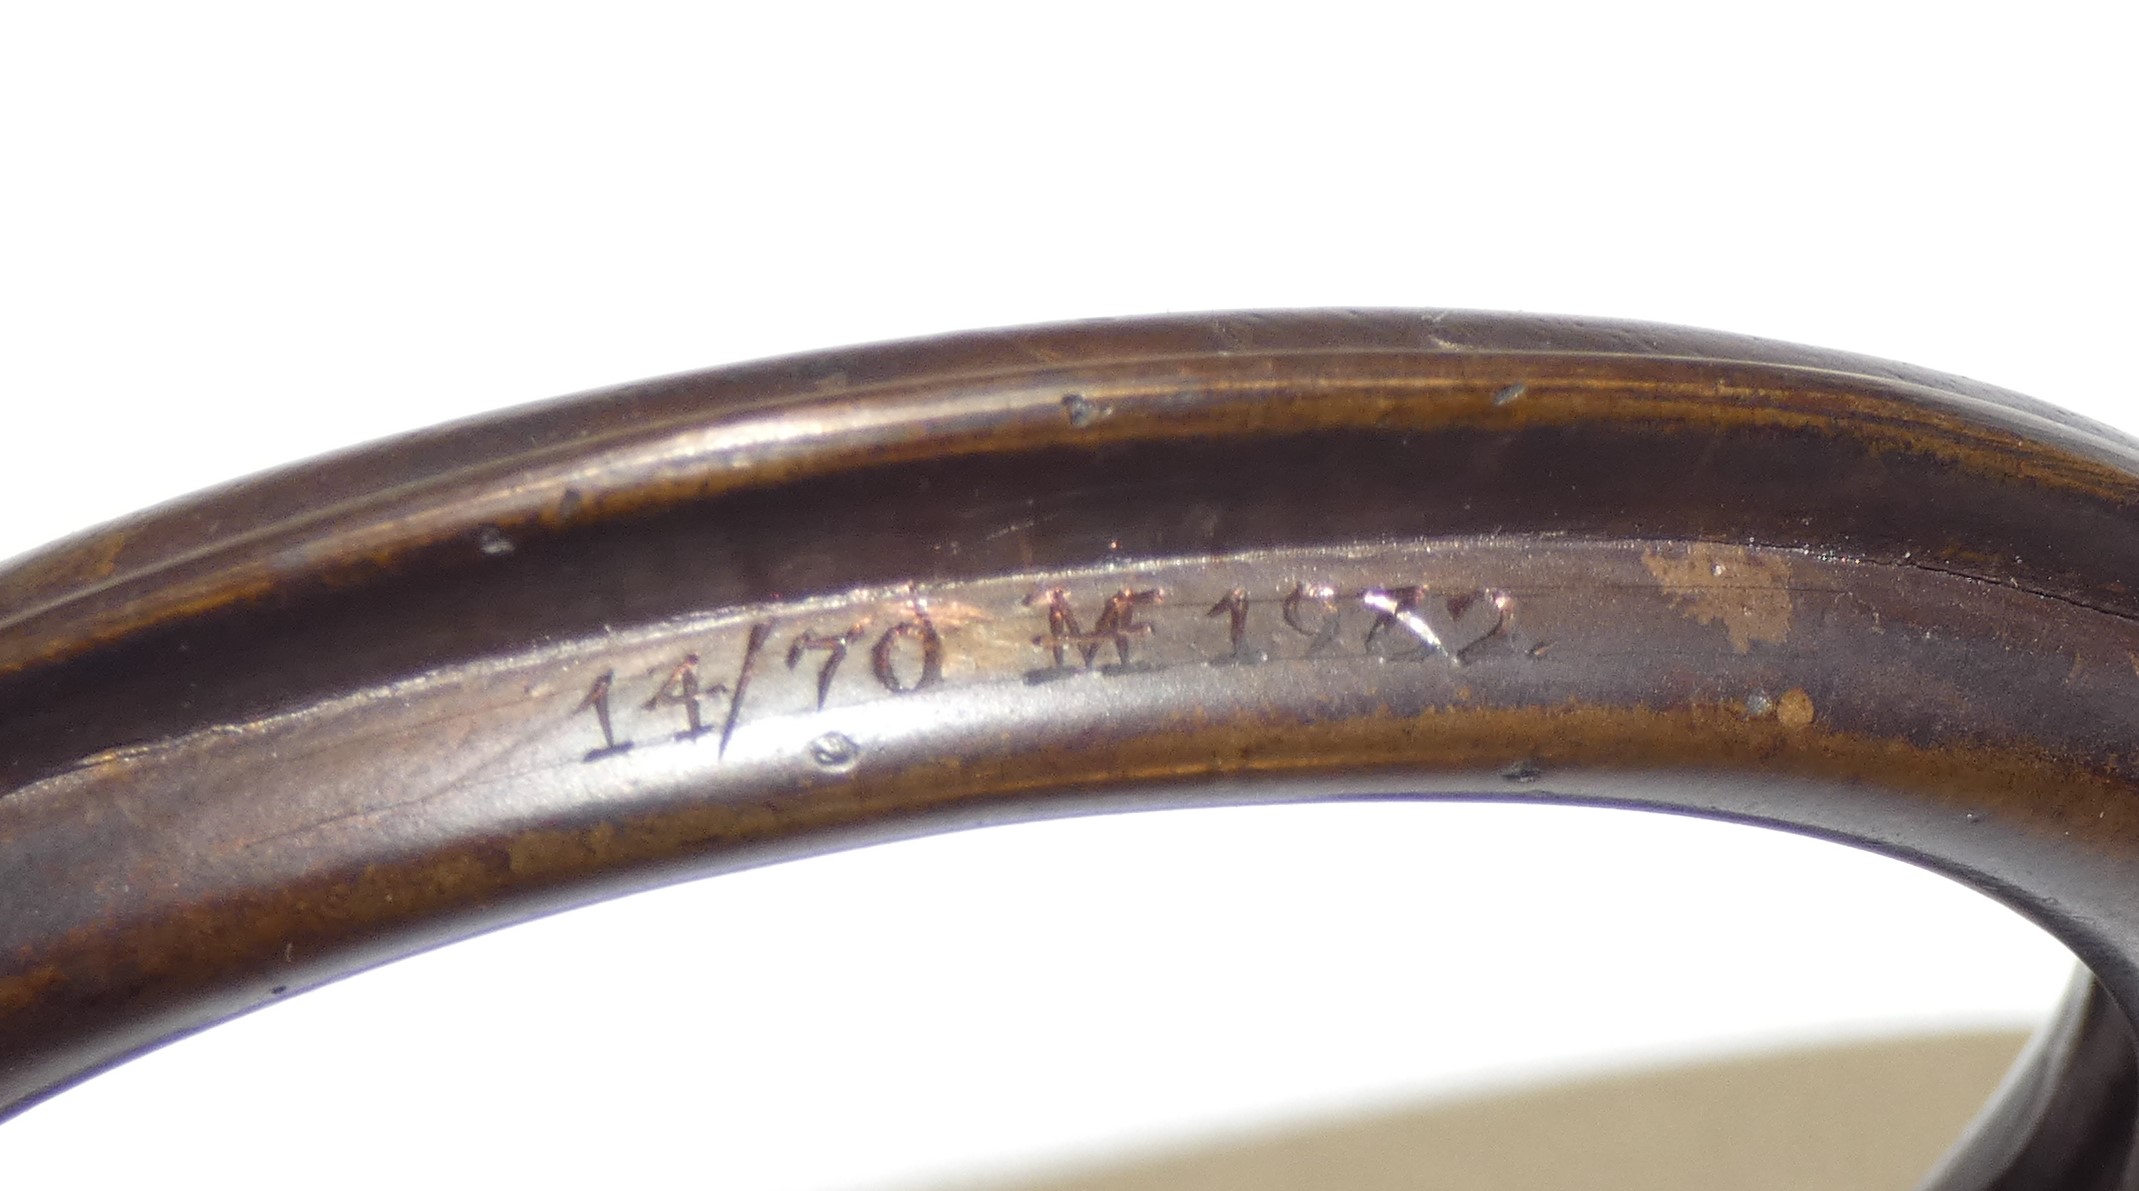 British Art Medal Society, unknown, torque bangle, bronze, inscribed 14/70 M 1980, 8 cm. - Image 3 of 3